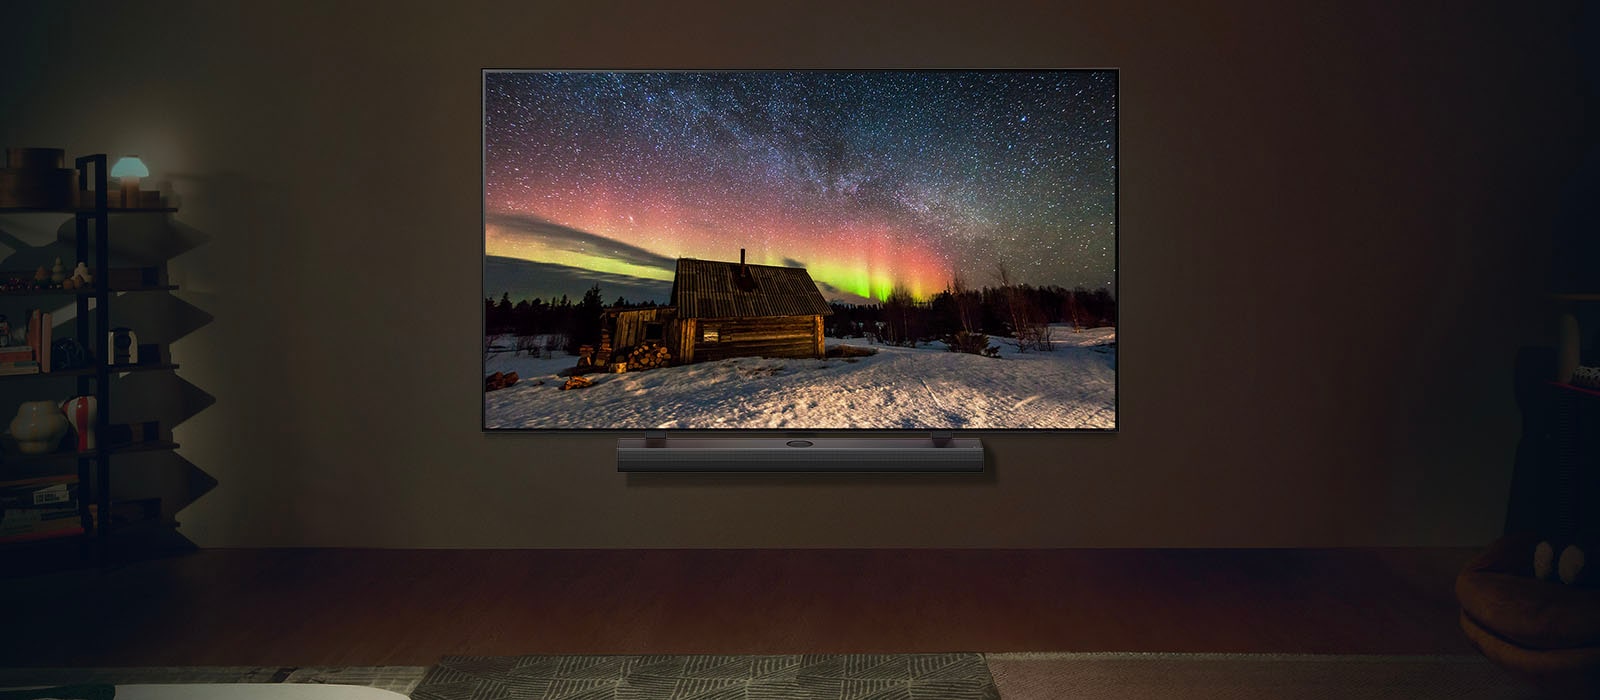 LG TV and LG Soundbar in a modern living space in nighttime. The screen image of the aurora borealis is displayed with the ideal brightness levels.